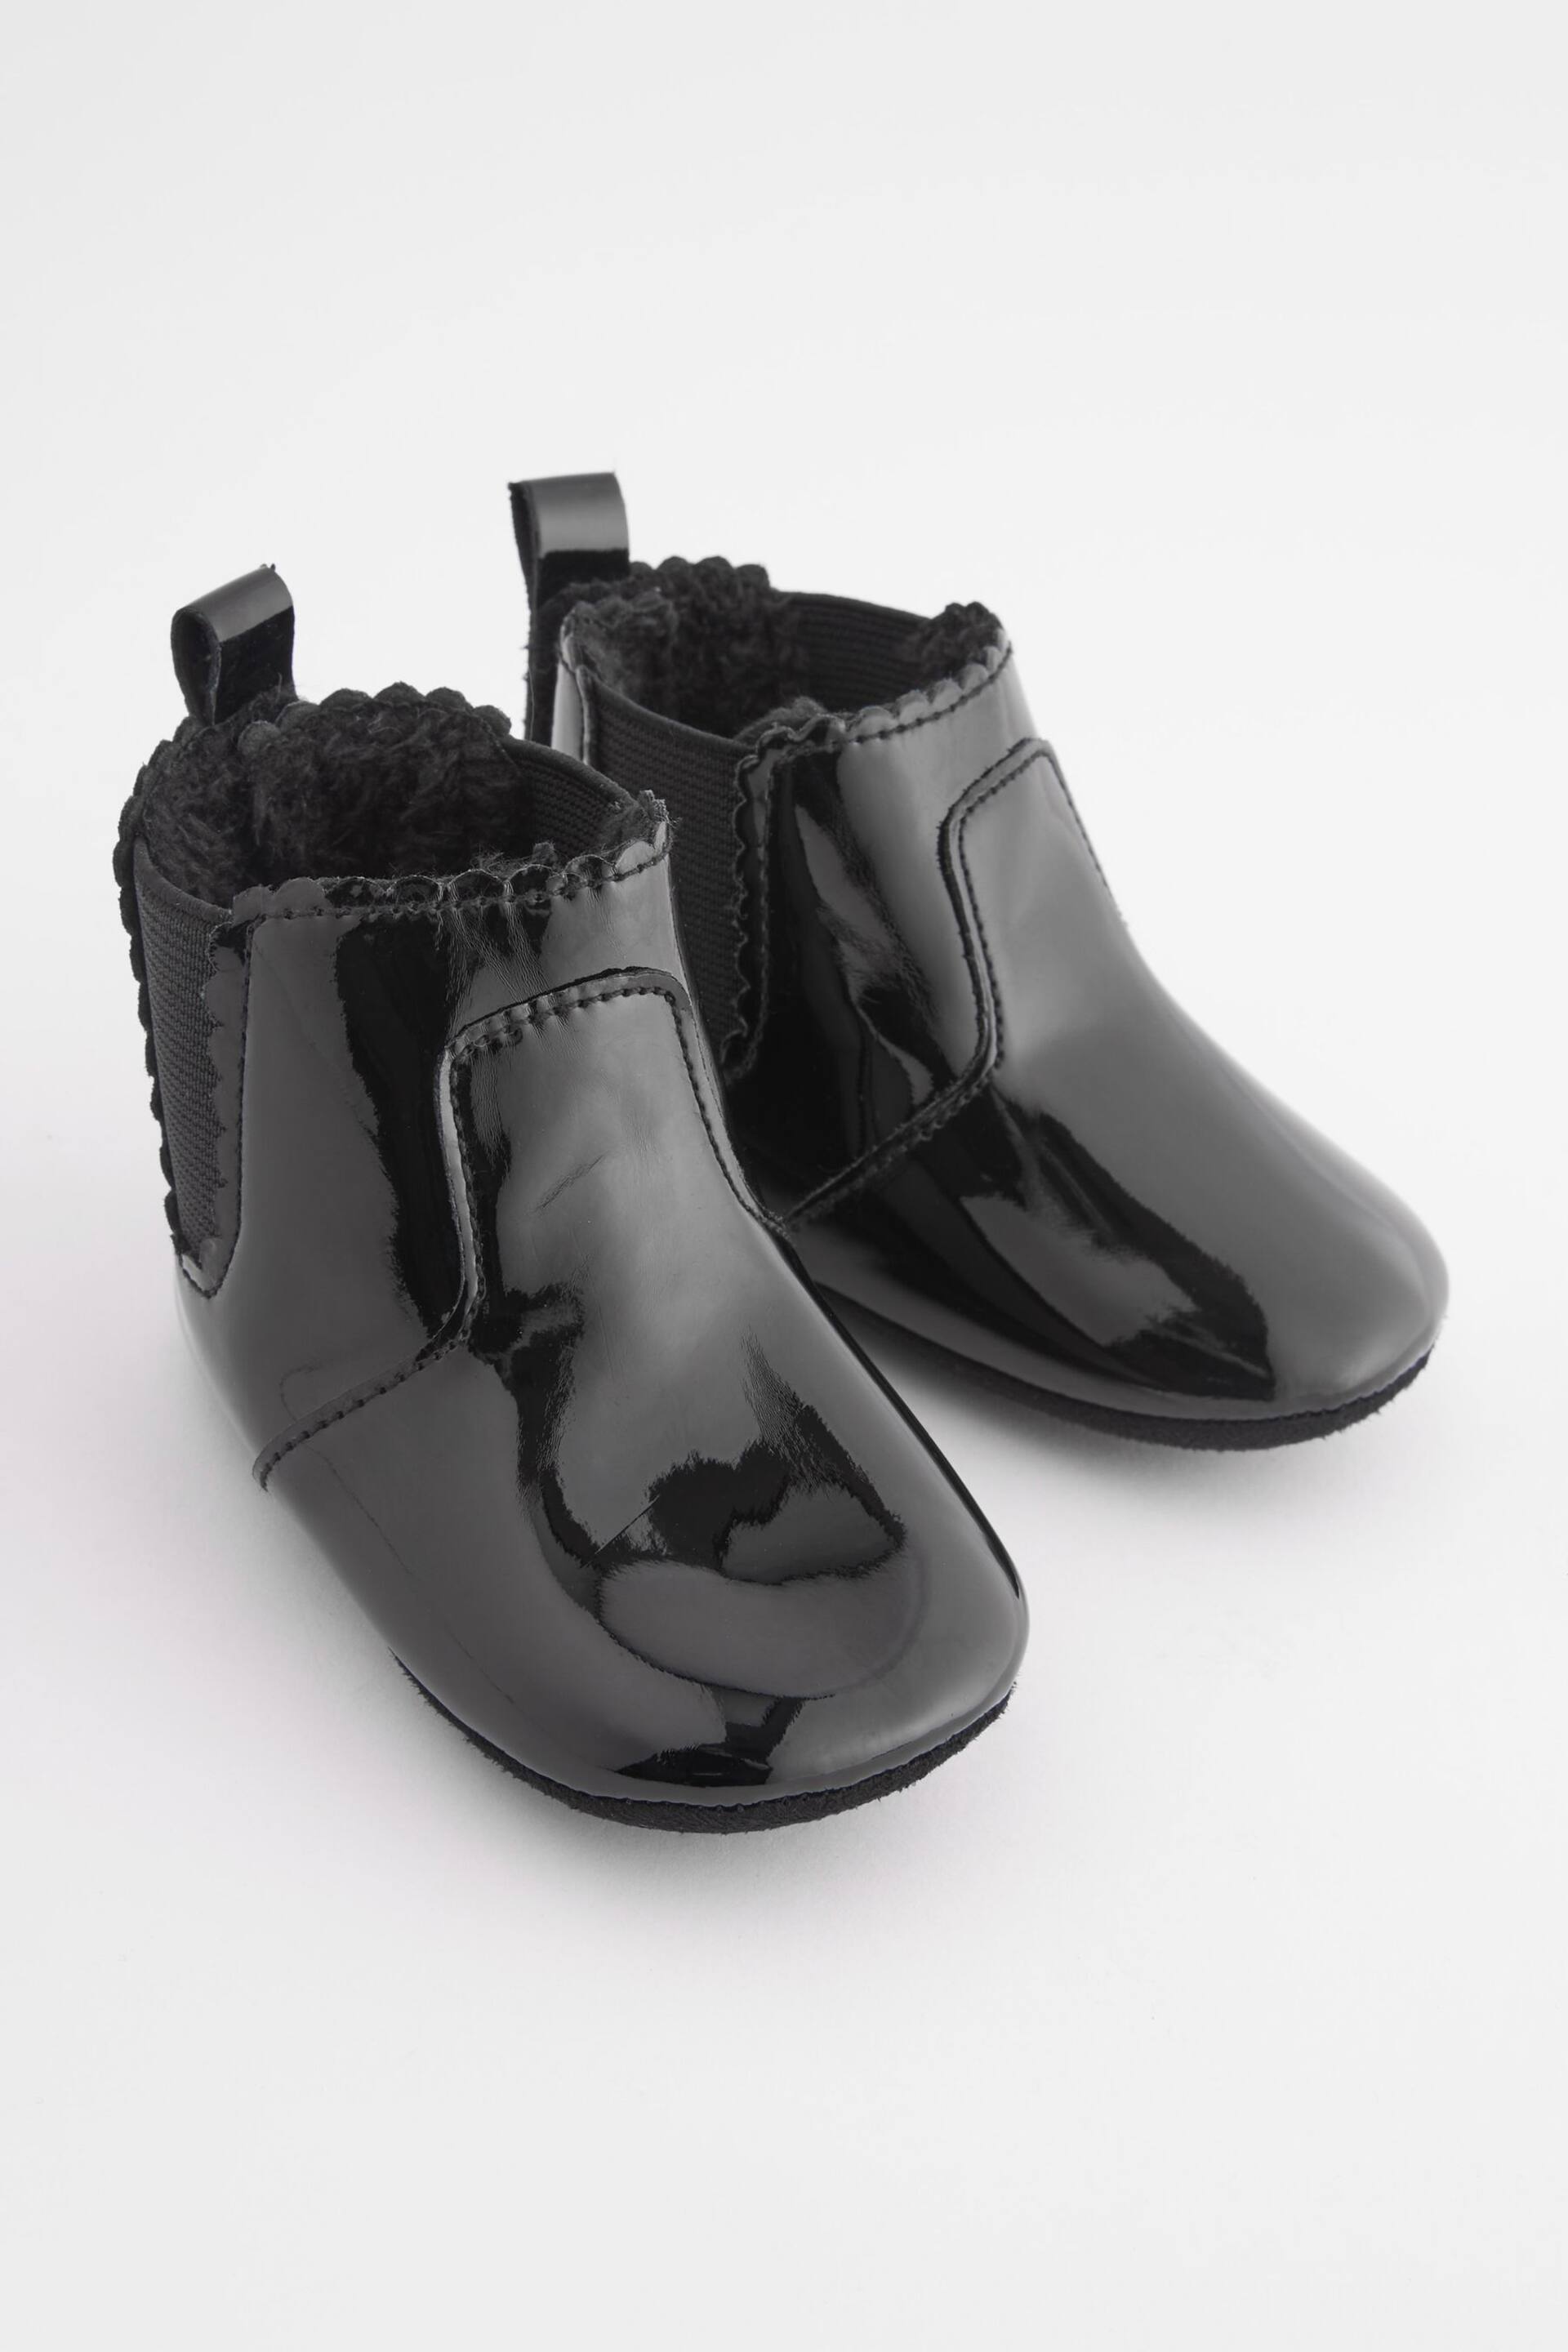 Black Patent Chelsea Baby Boots (0-24mths) - Image 1 of 7